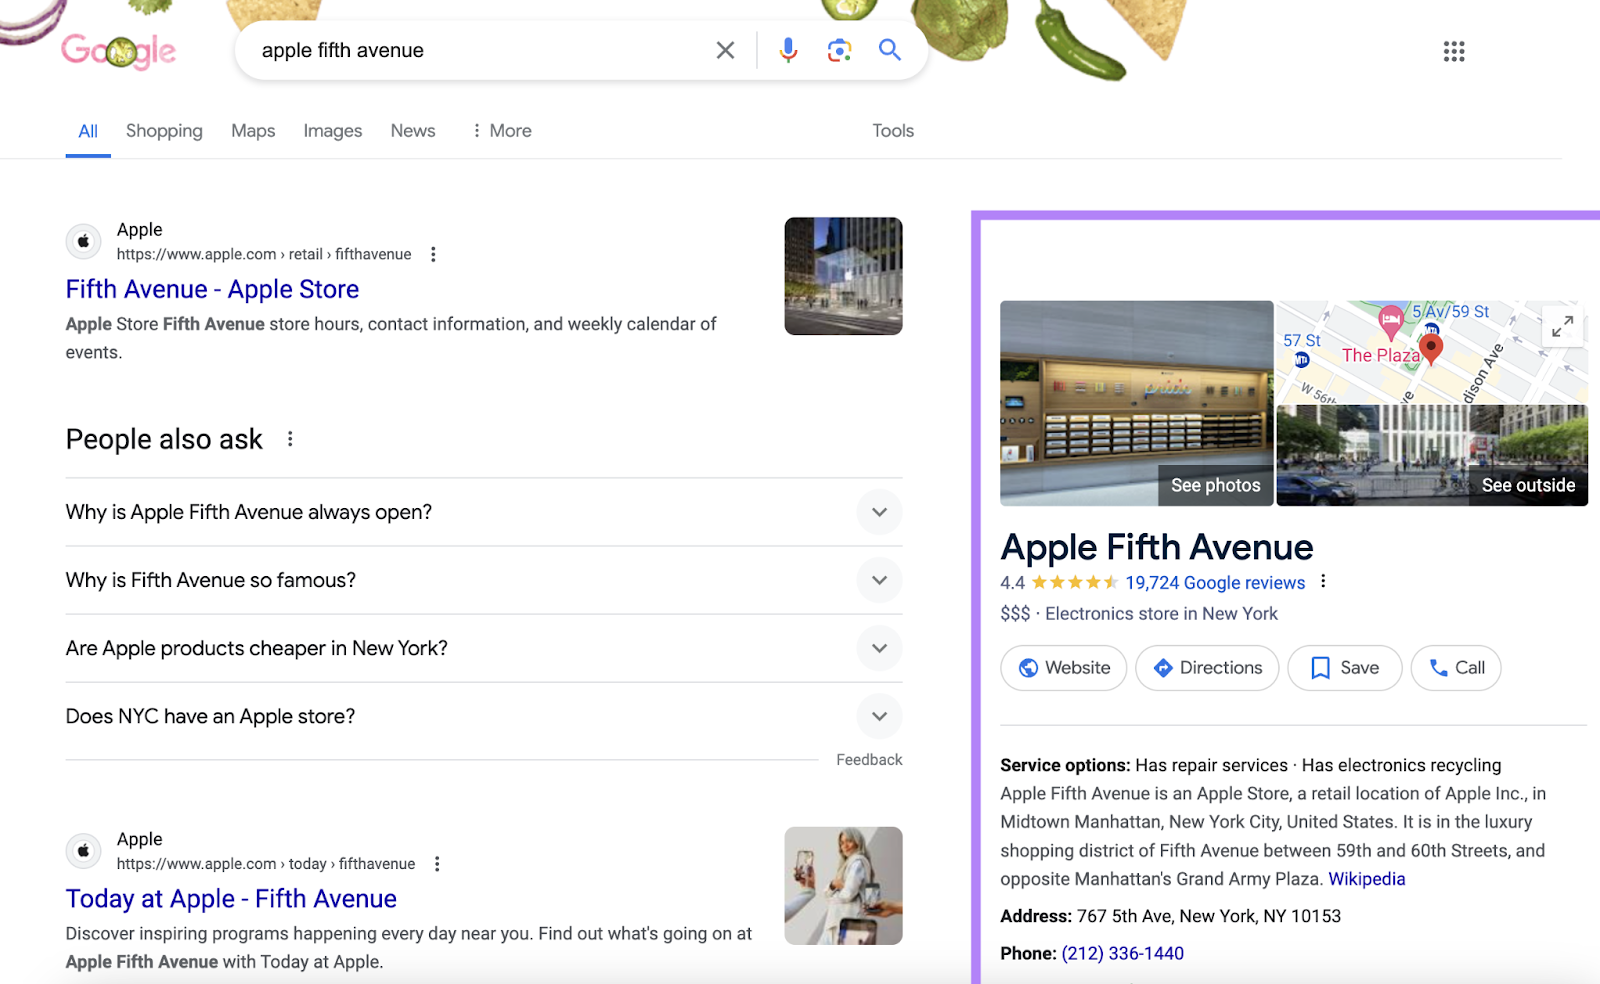 google business profile for apple's fifth avenue store location